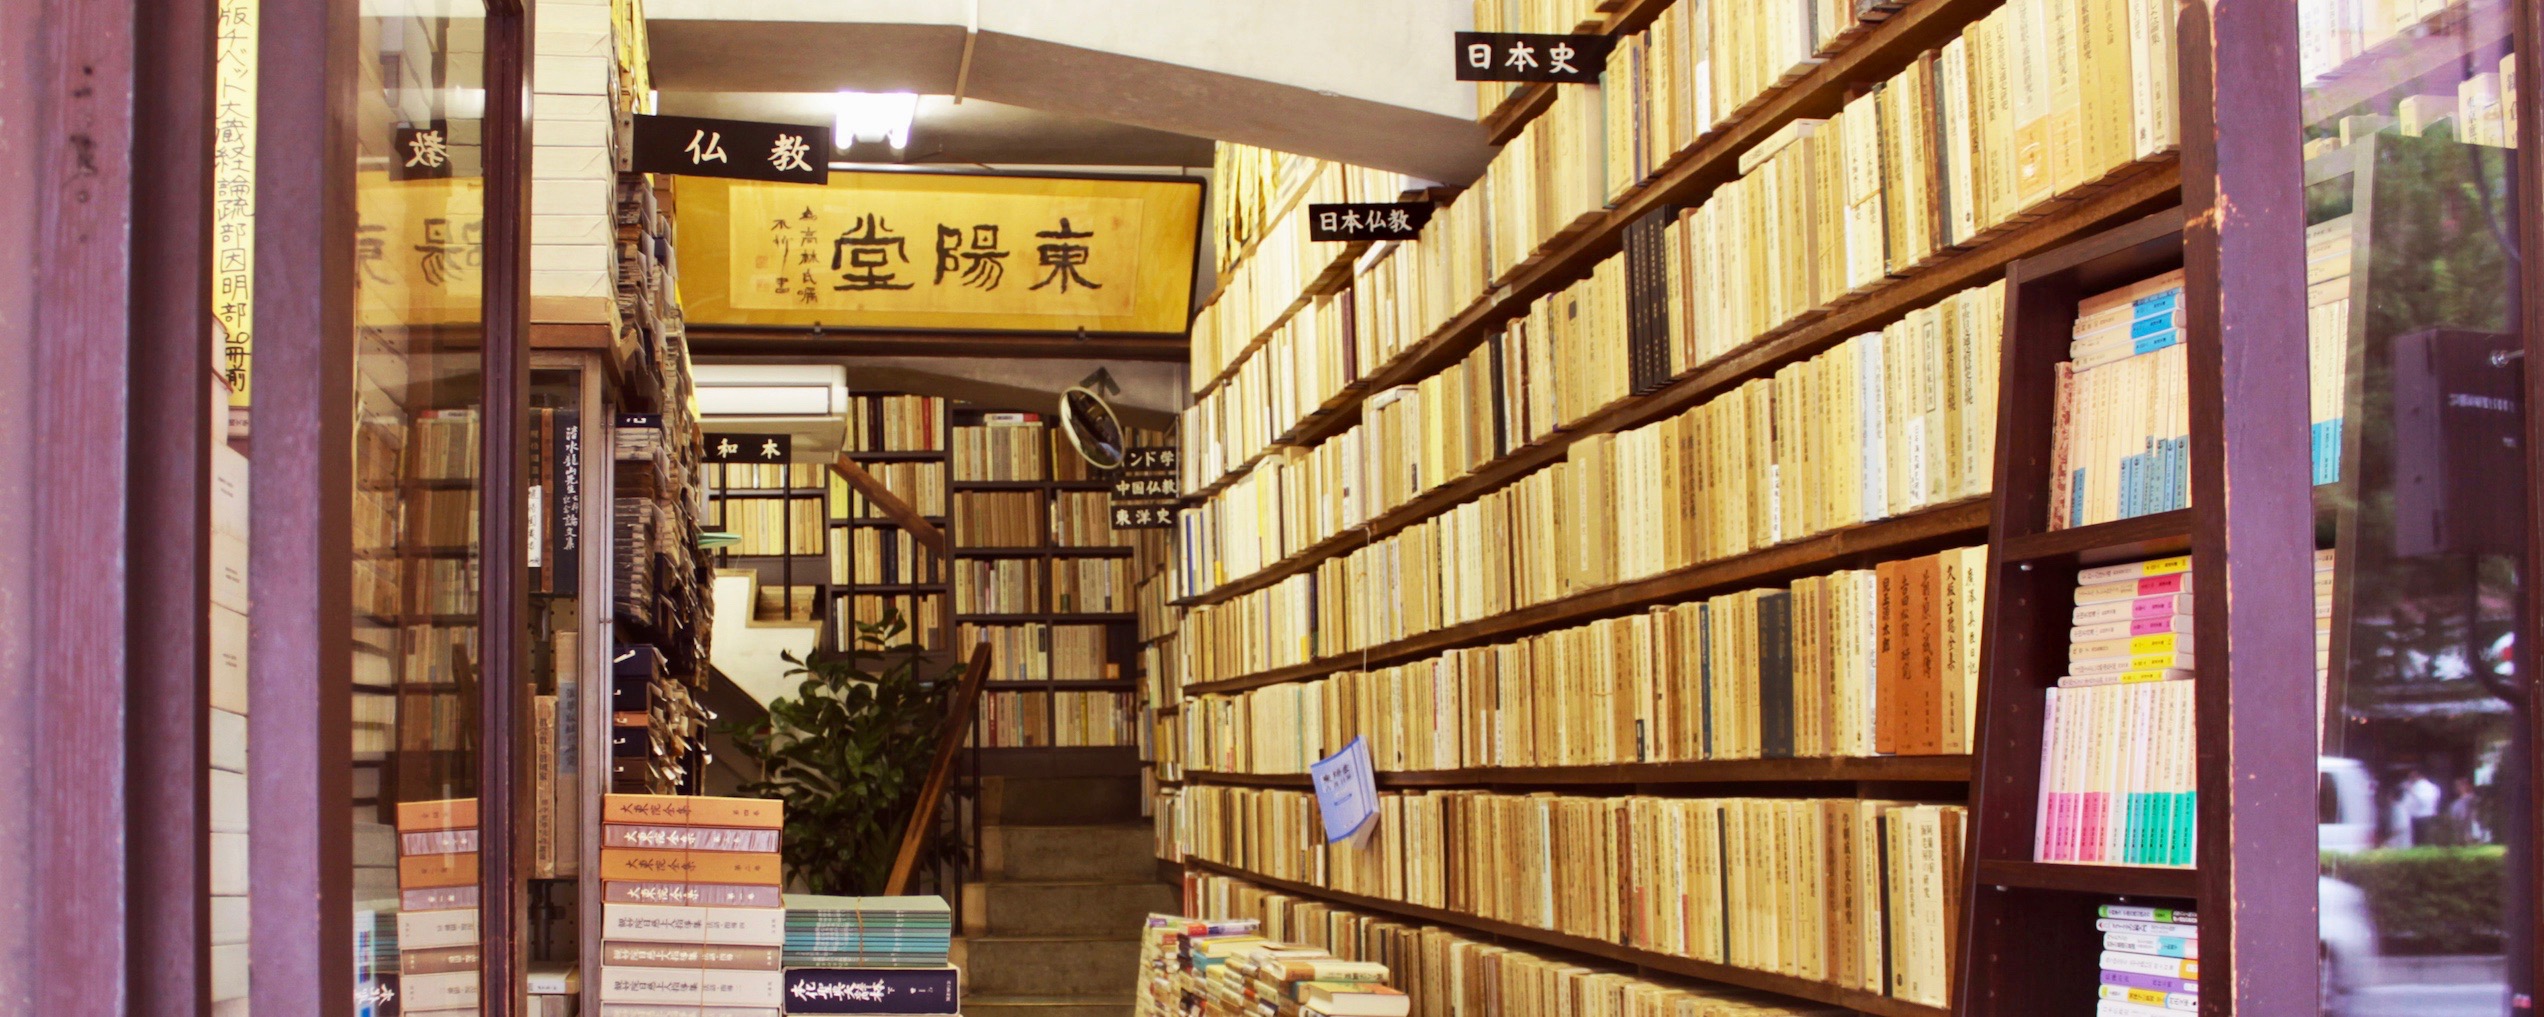 Jinbocho Book Town Is A Book Lover's Paradise - Tokyo In Pics